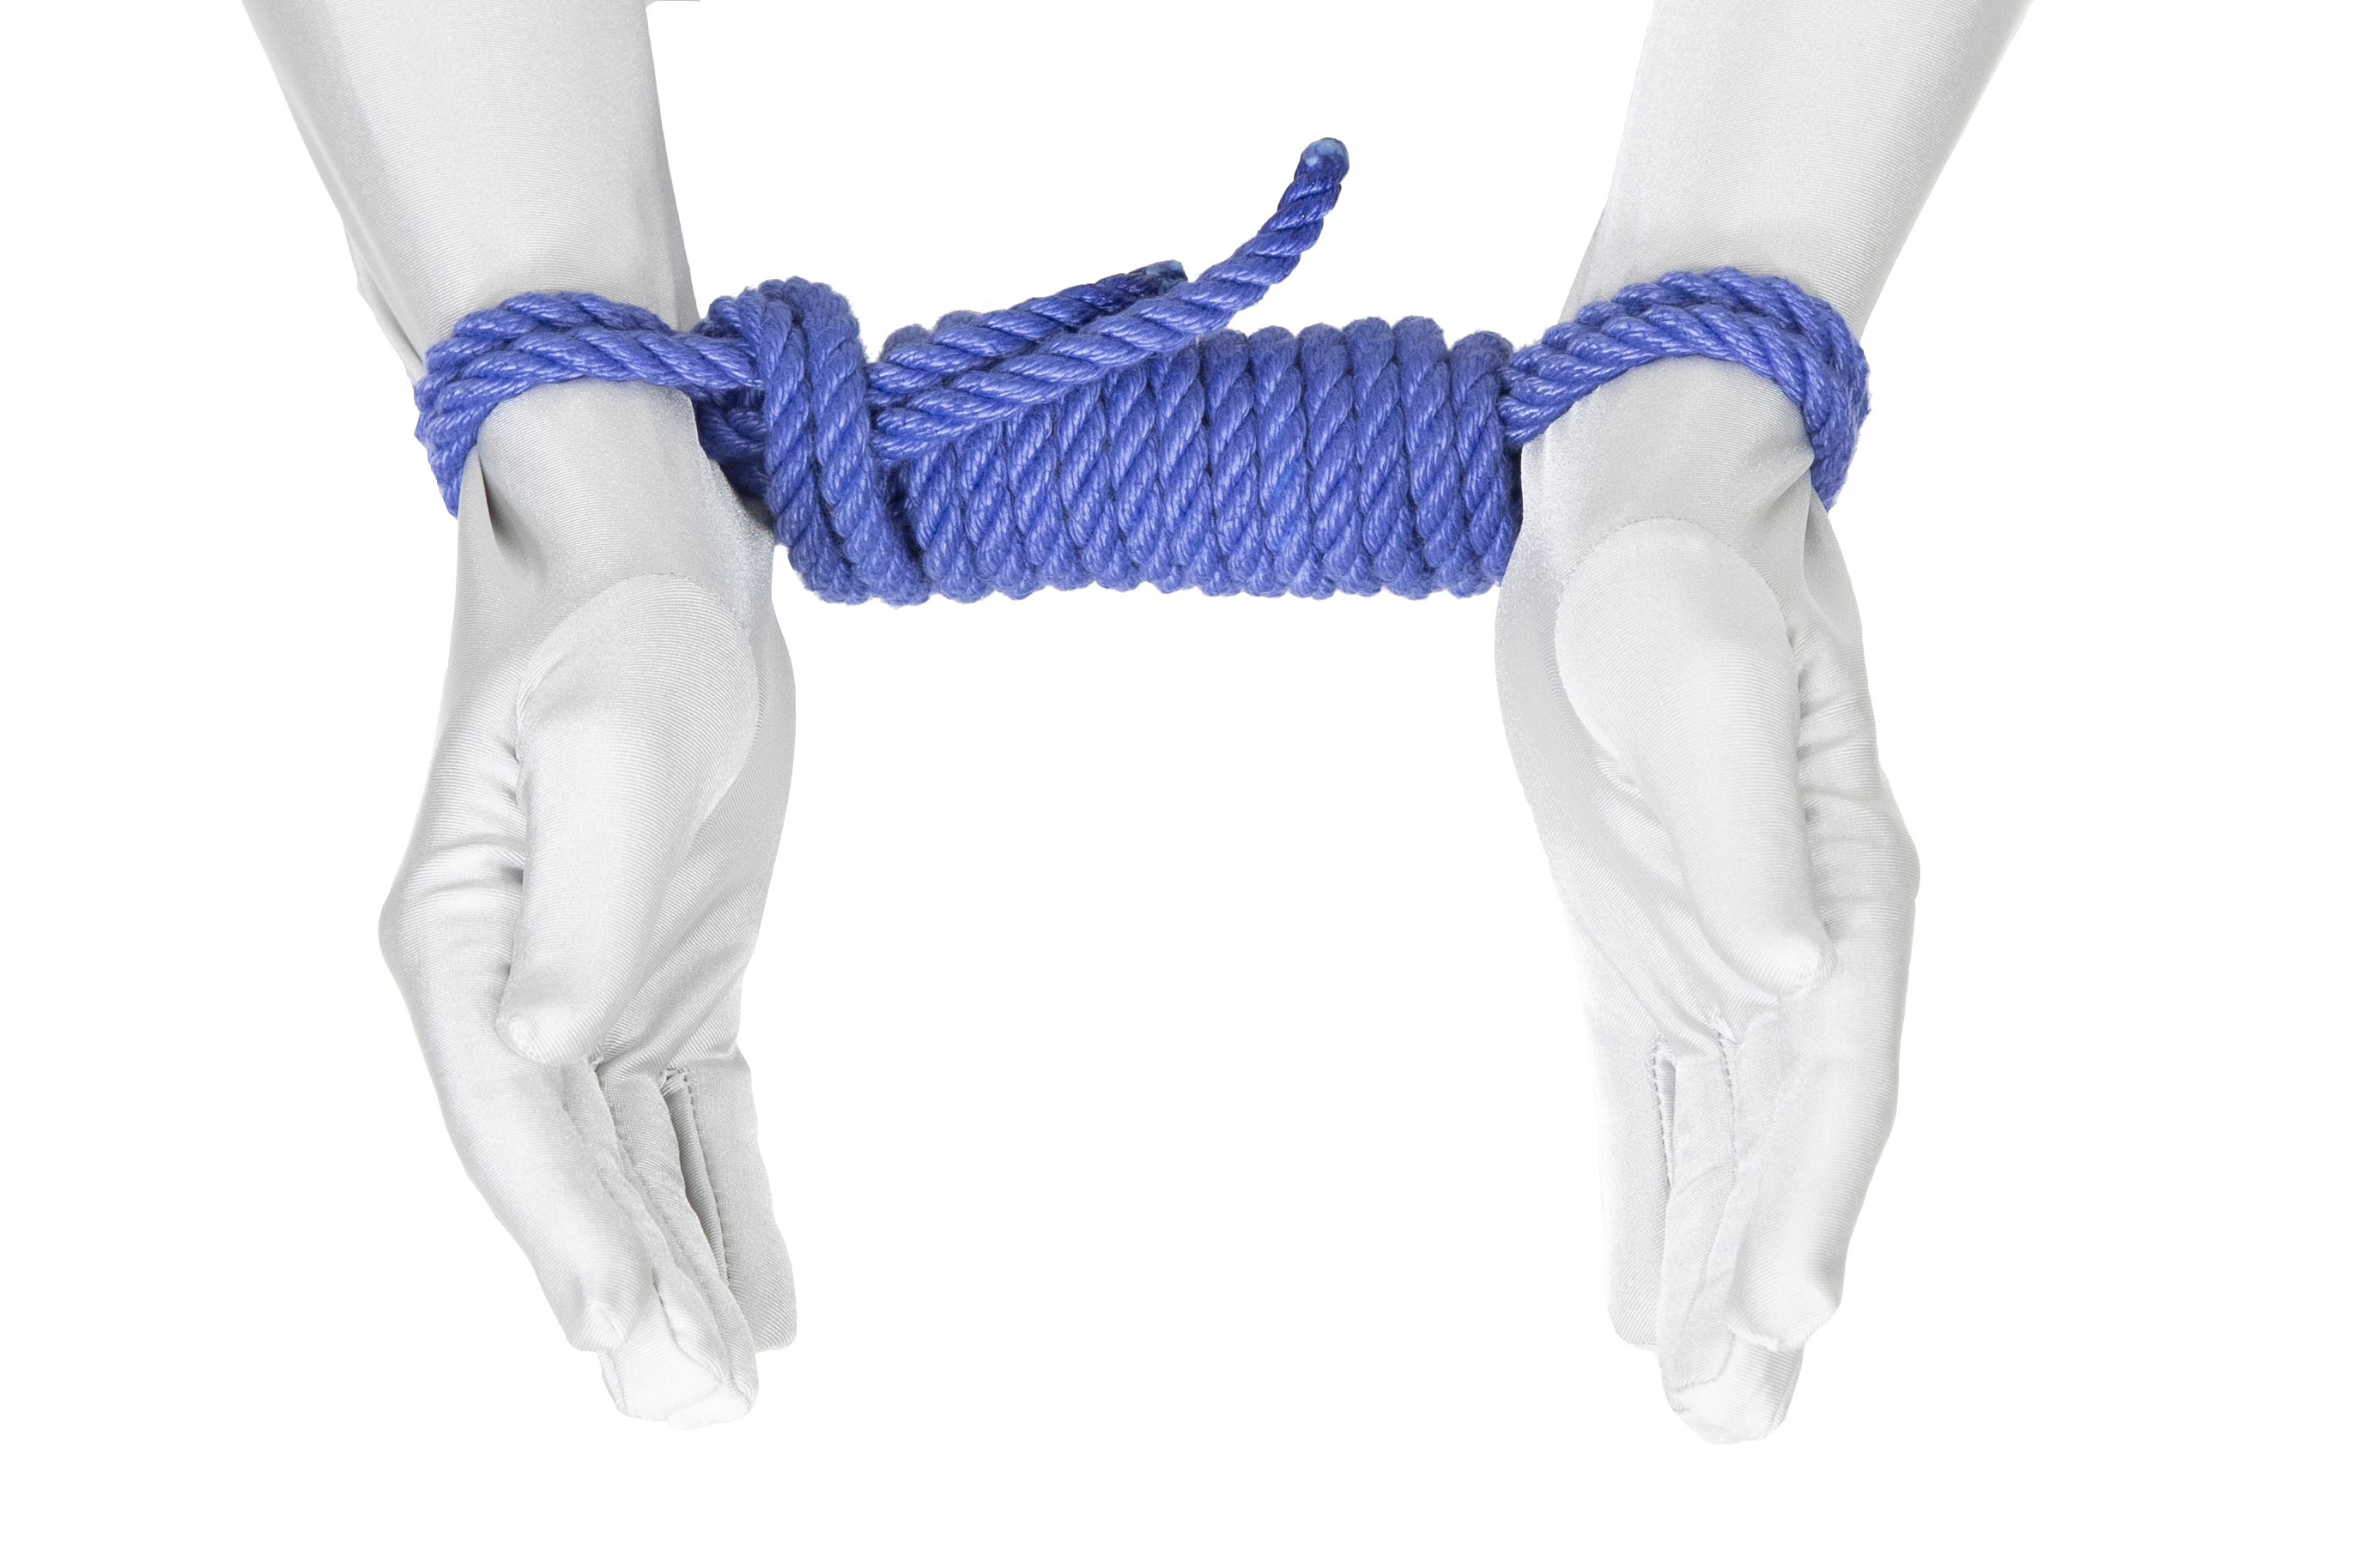 Two wrists tied together but separated by a six inch long bar tie consisting of rope wound around itself.